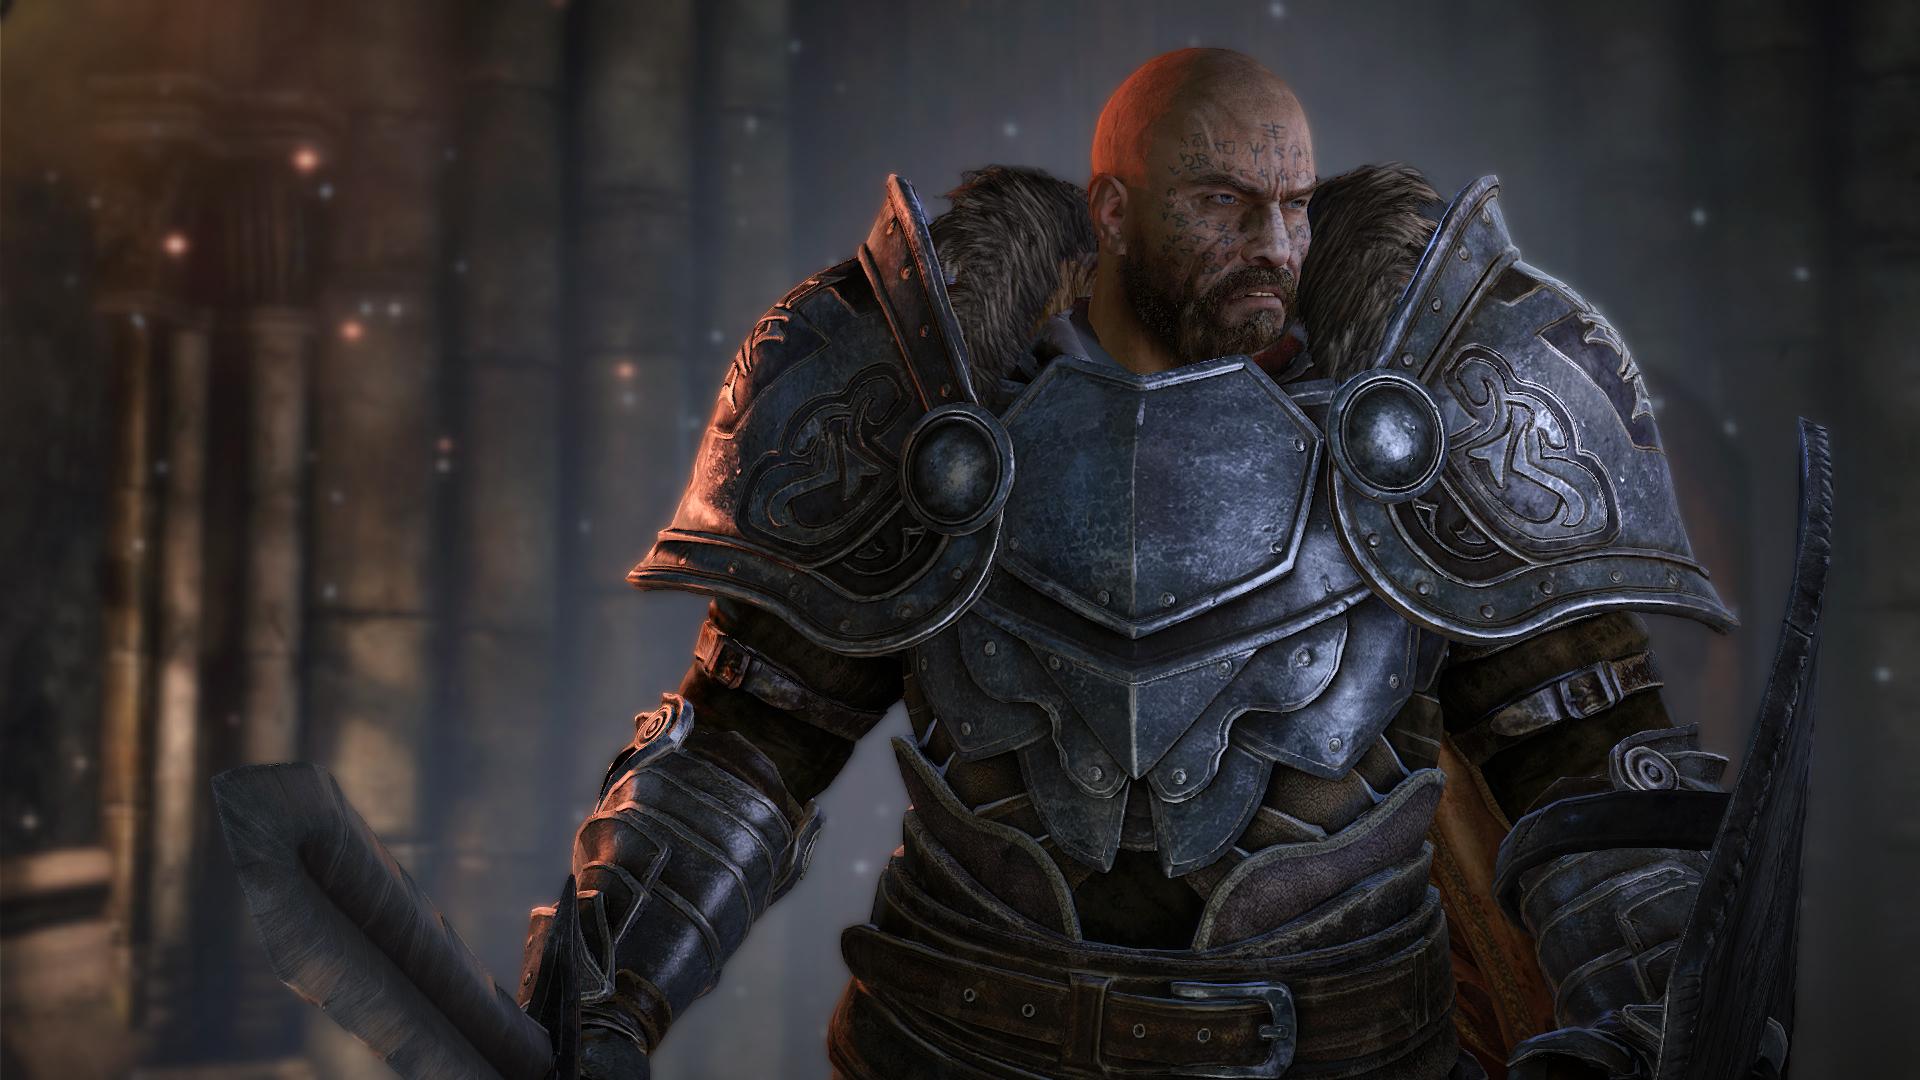 Lords of the Fallen: watch five hours of gameplay